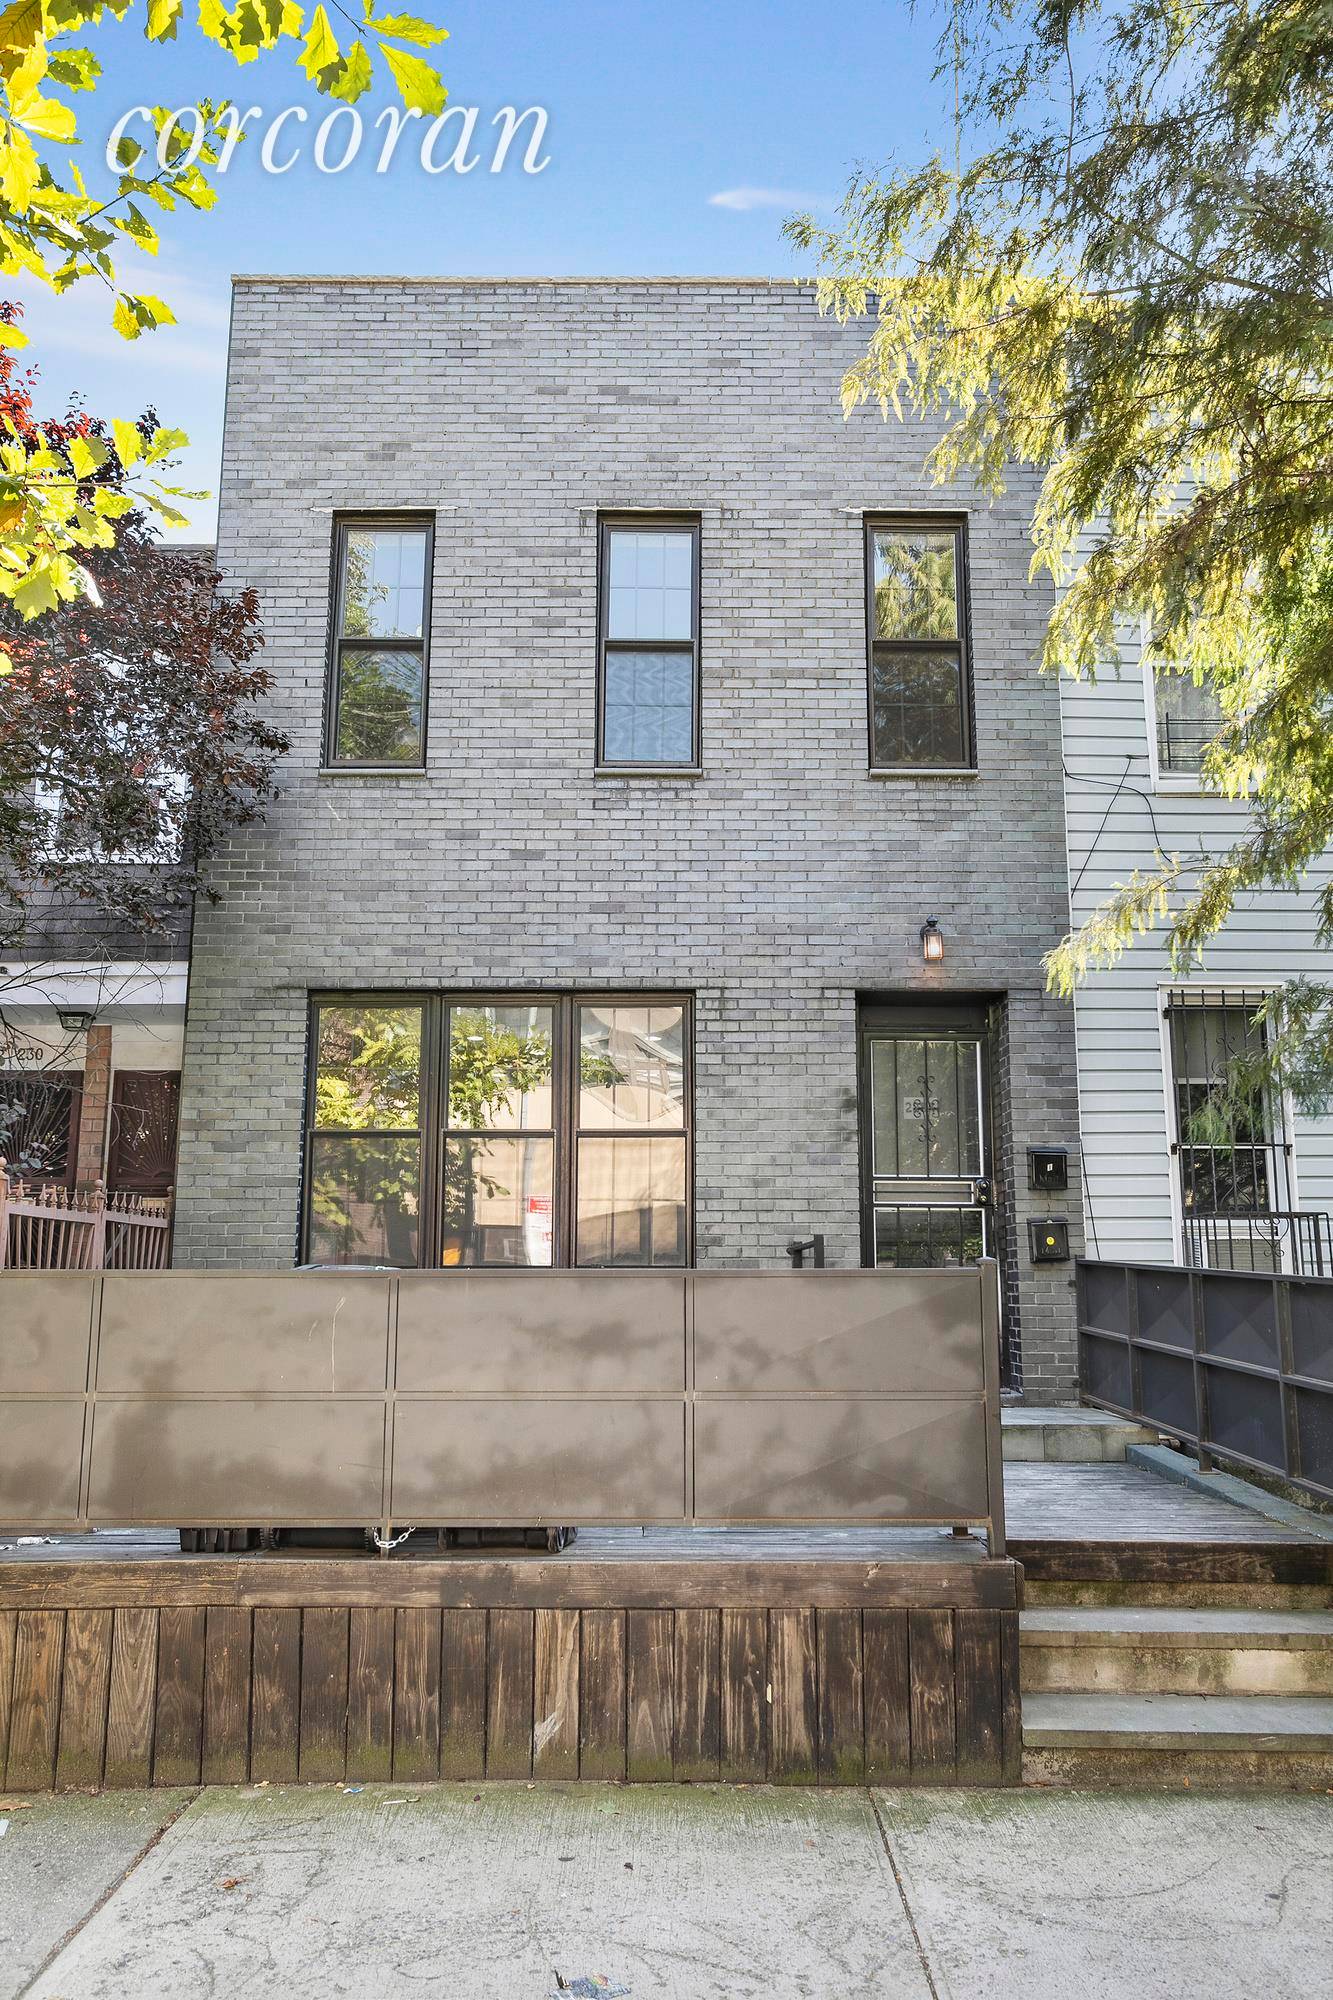 Fully renovated 2 family brick townhouse with finished basement is perfect for investors looking for an immediate 4.